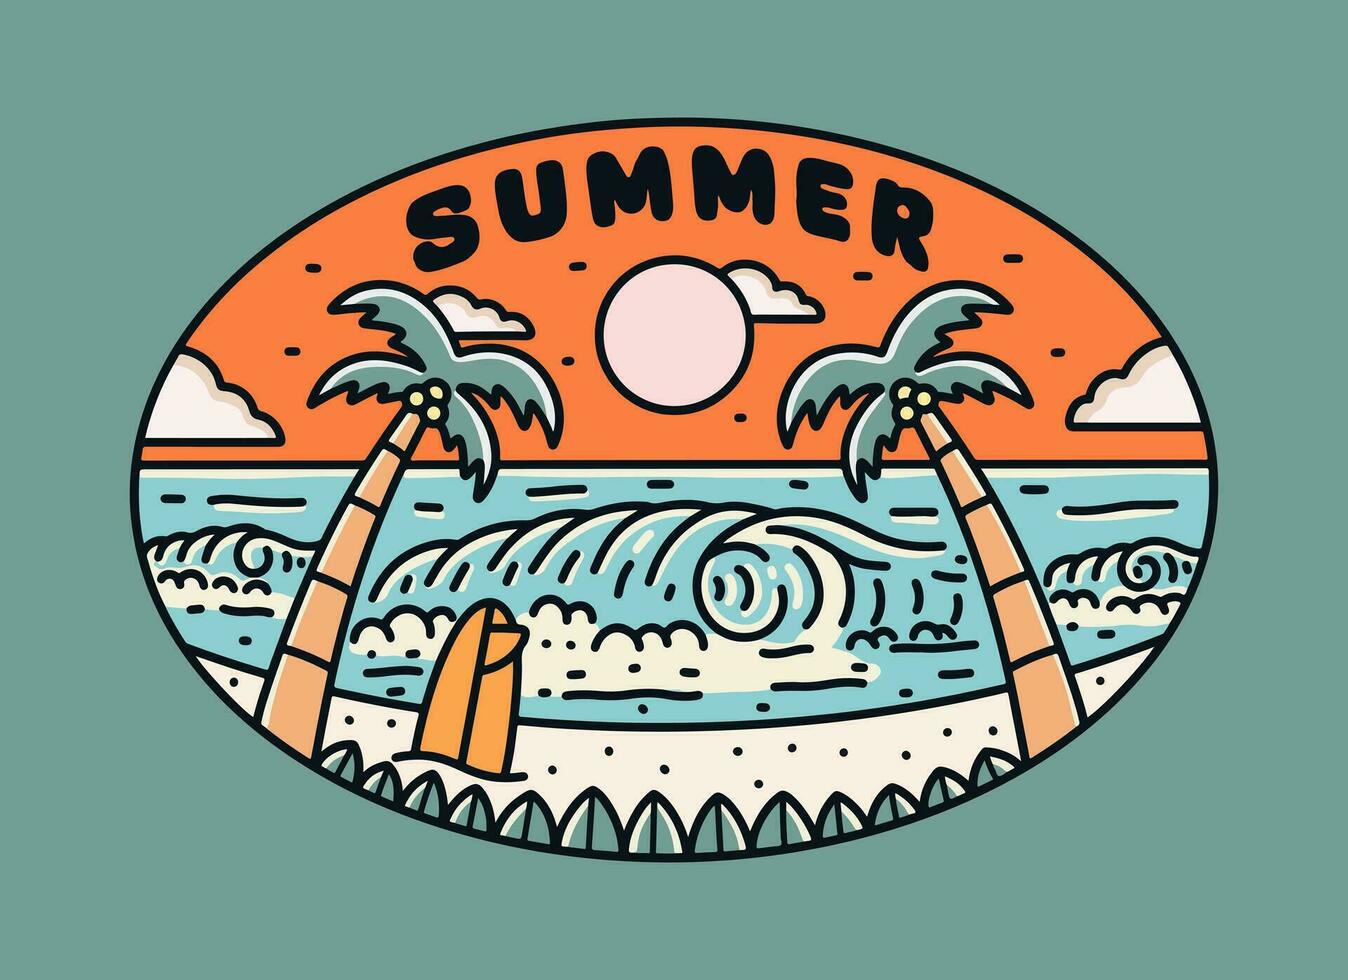 Summer vibes with the twin coconut and surfboard design for t-shirt, badge, sticker, etc  vector illustration